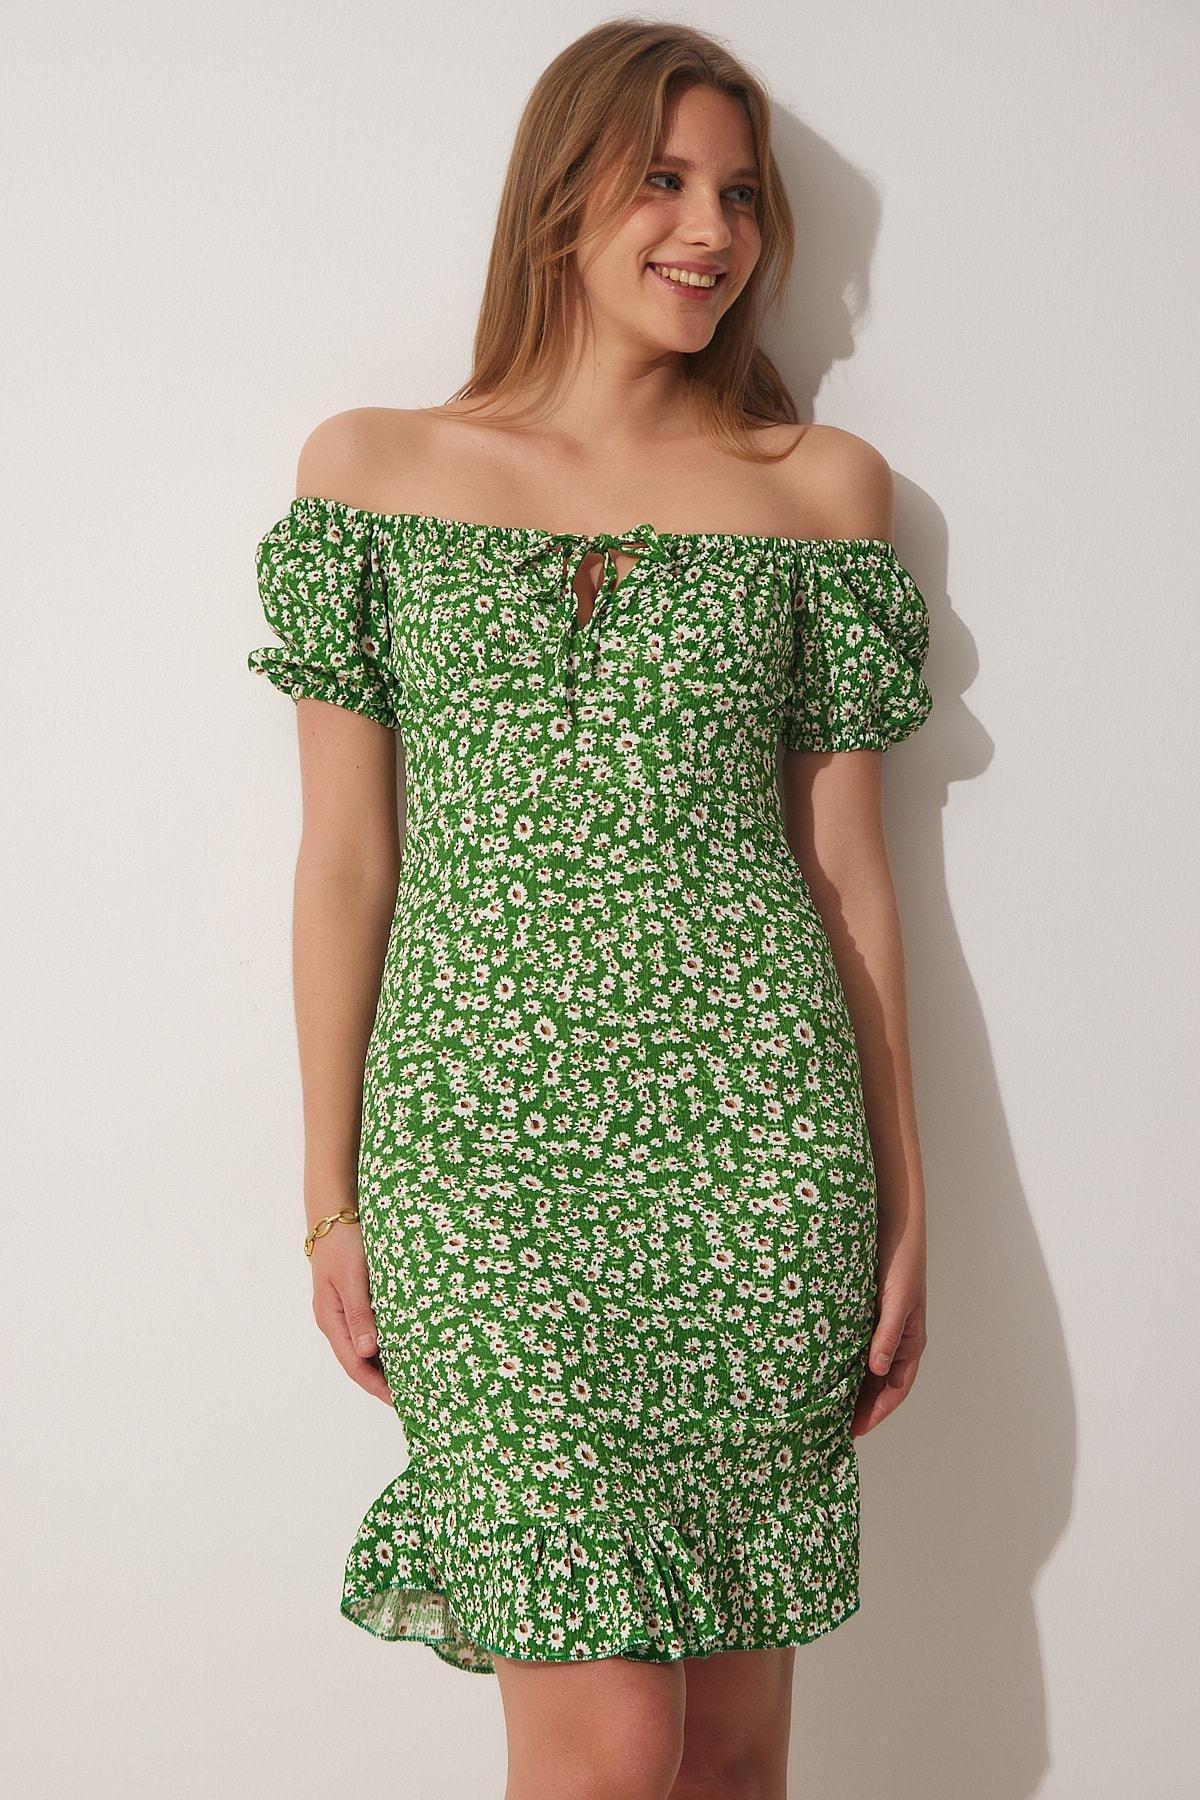 Happiness Istanbul - Green A-Line Dress